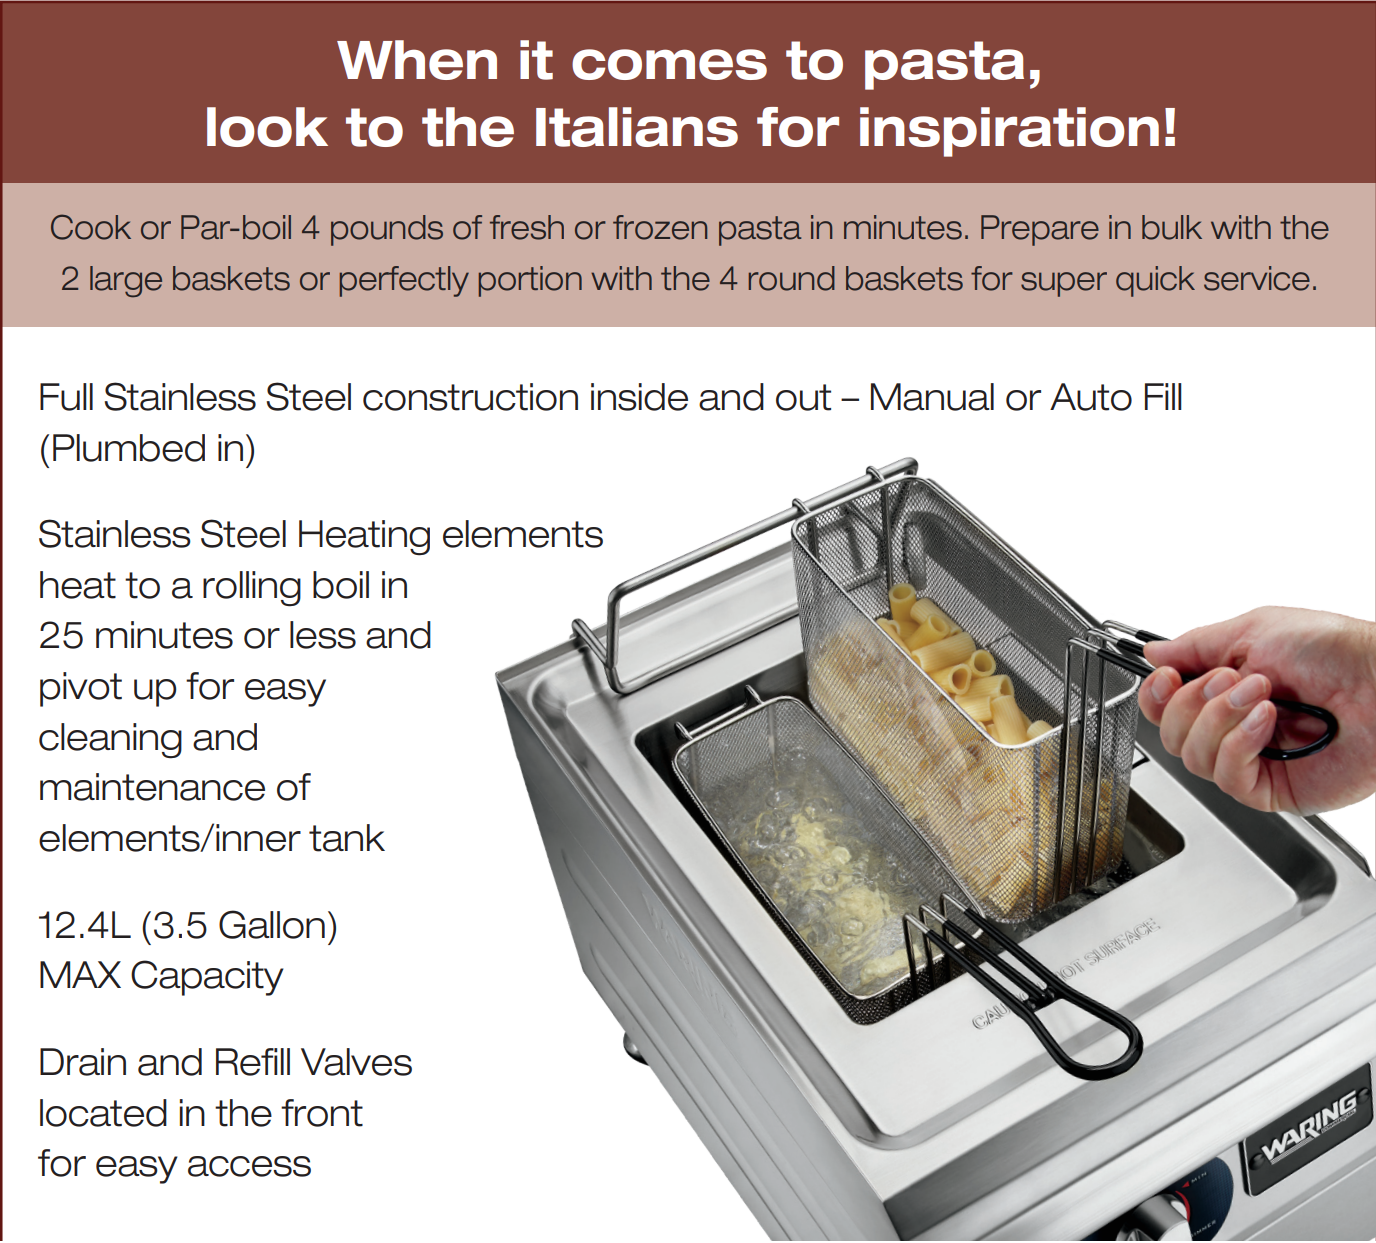 WPC100 Commercial Pasta Cooker by Waring Commercial